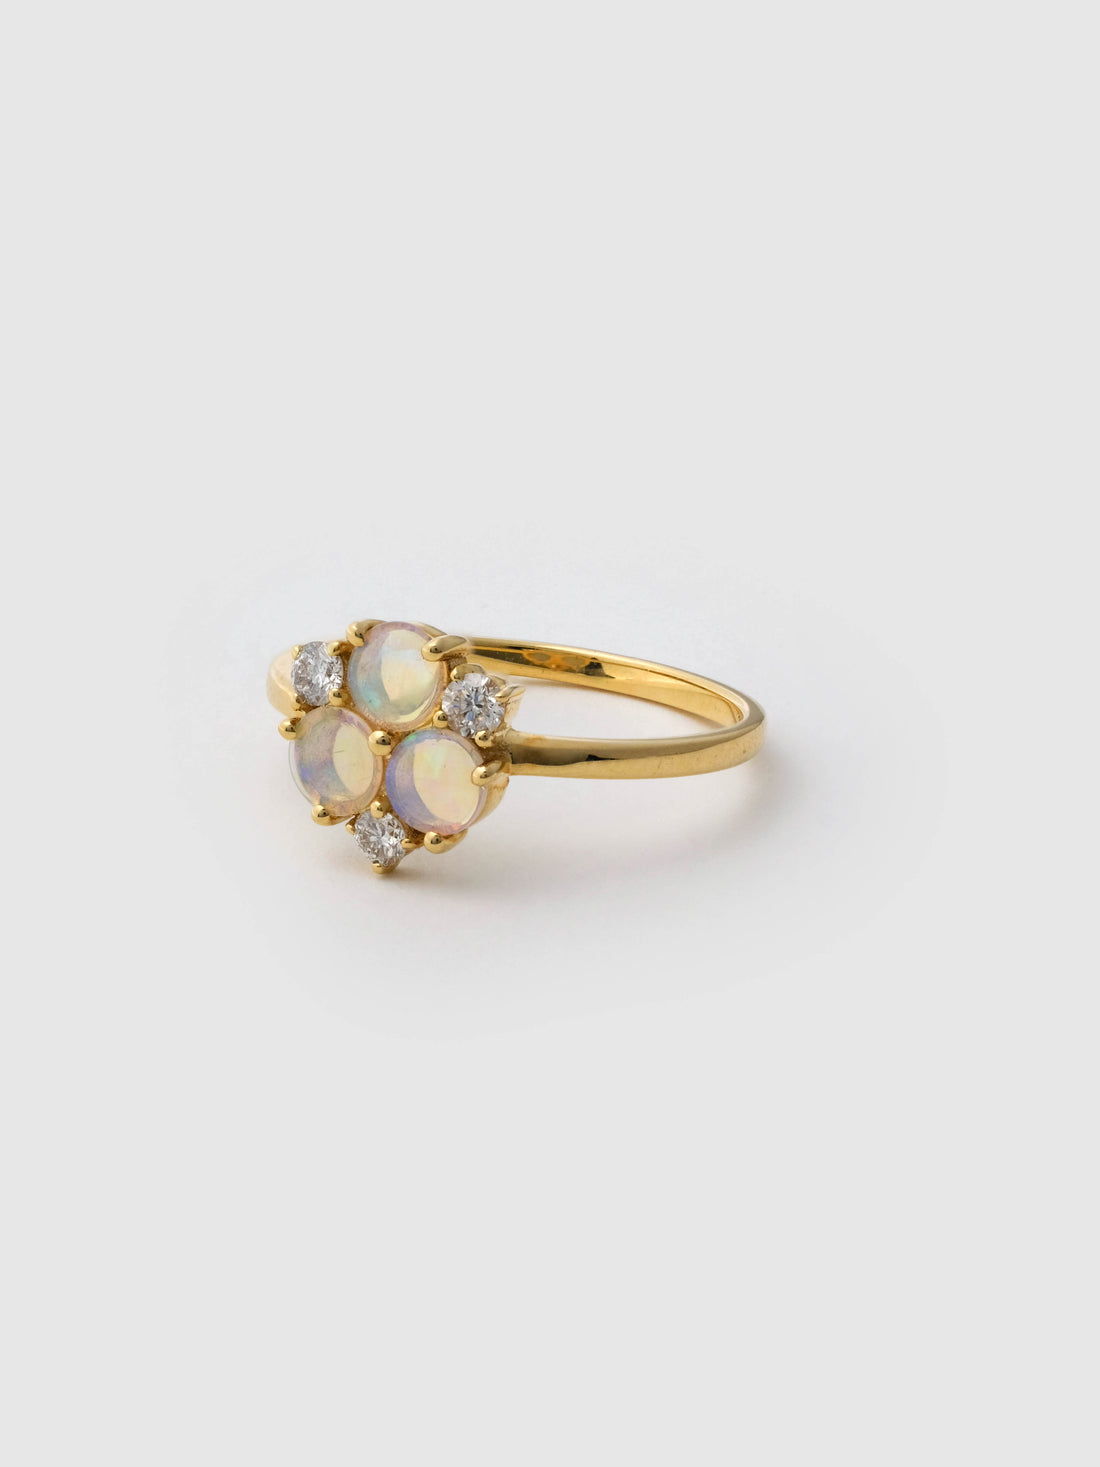 Opal and Diamond Clover Ring, 18k solid gold